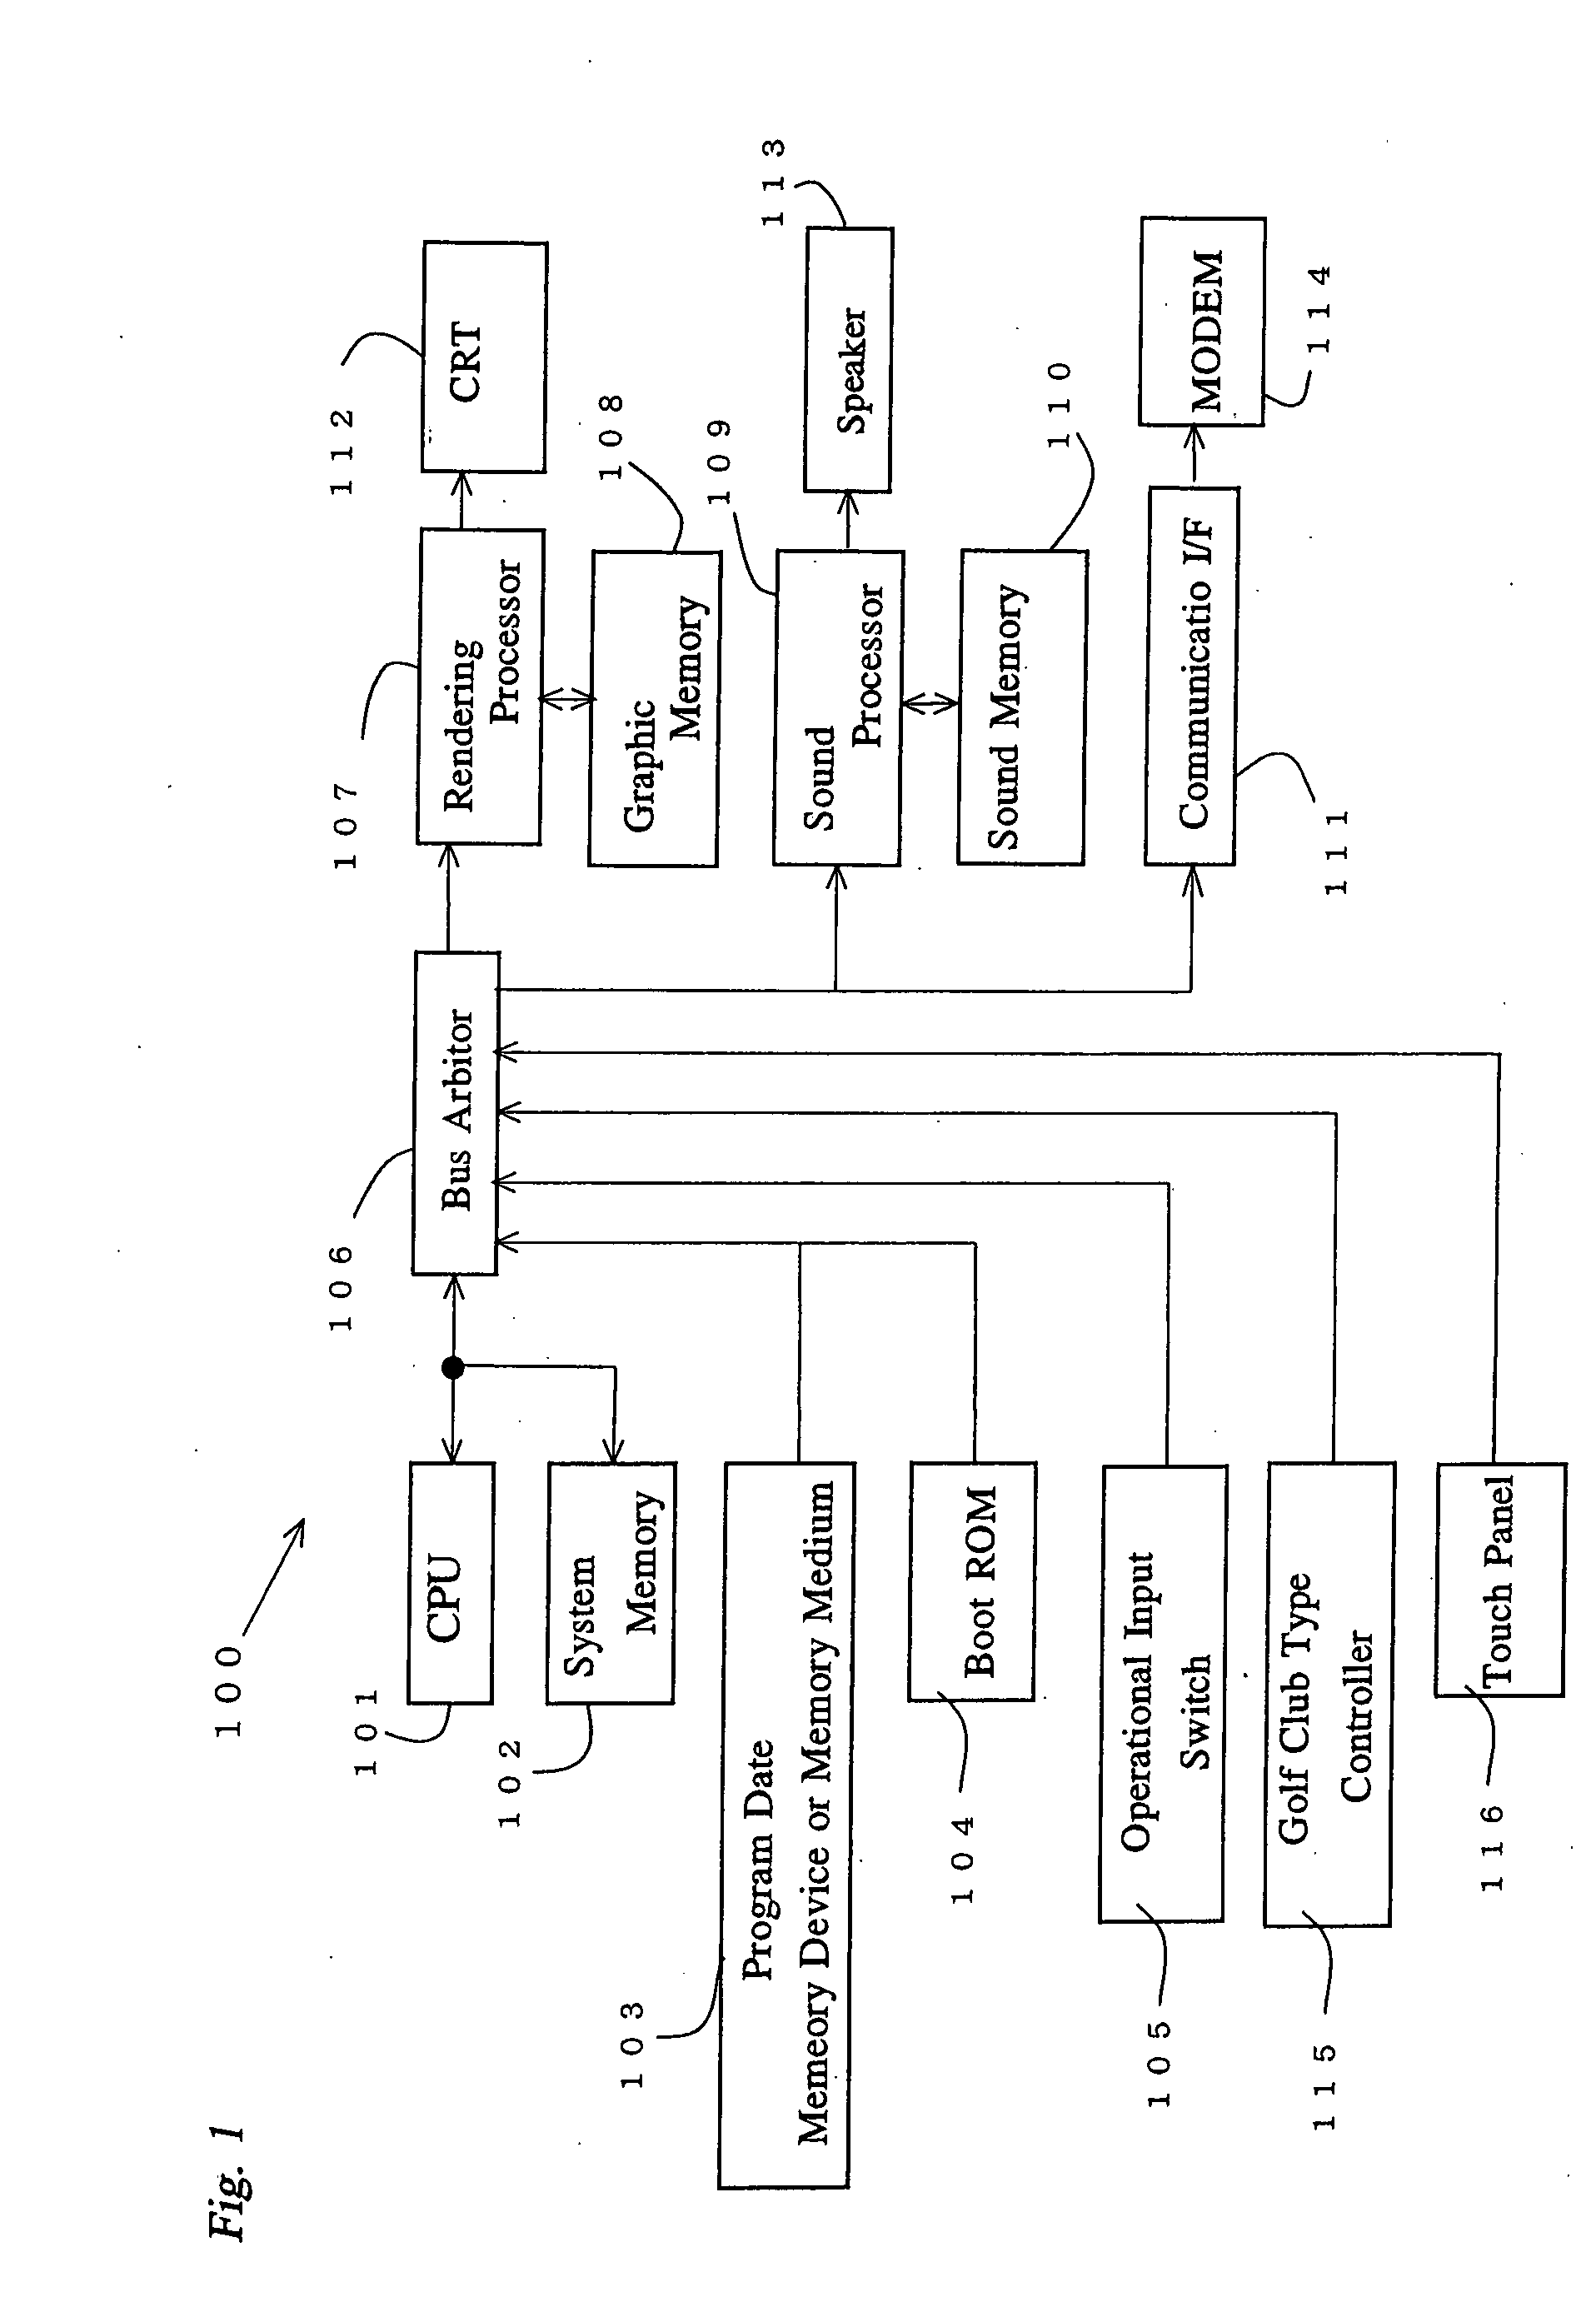 Image display system and information processing apparatus